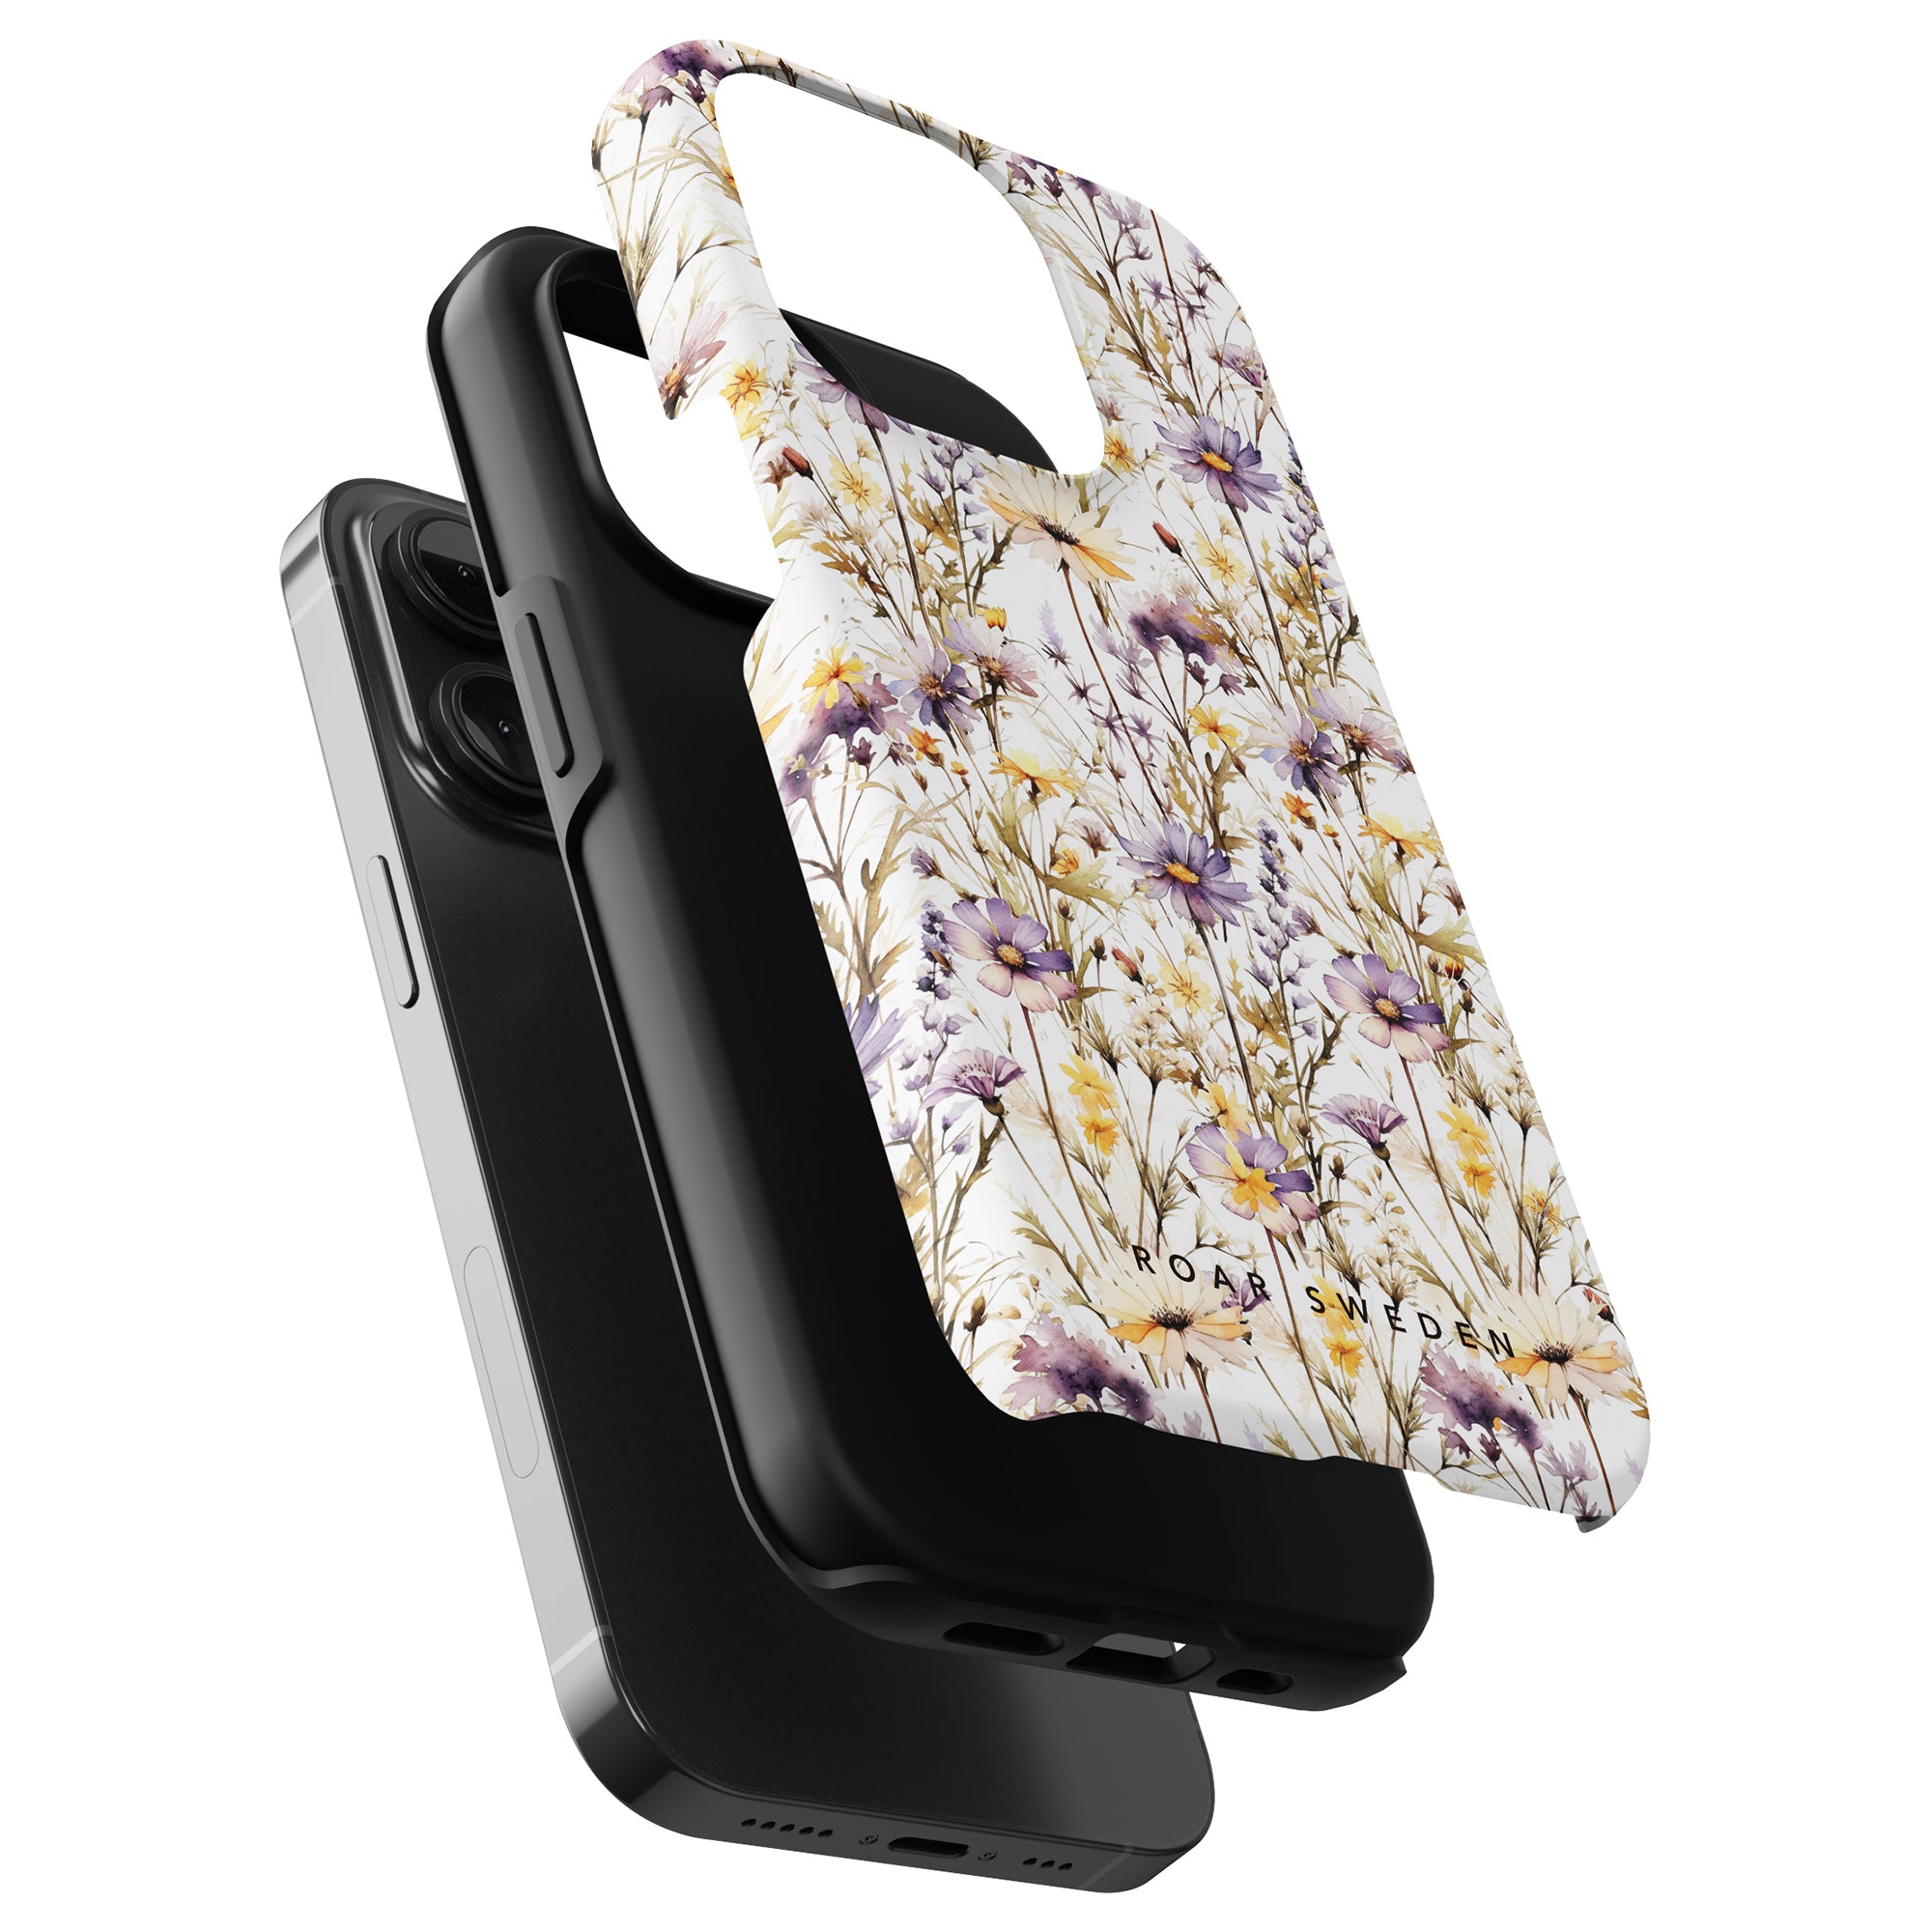 Three iPhone cases are stacked. The top case is a Purple Wildflower - Tough Case featuring a purple and yellow flower design. The middle case is black and partially transparent, while the bottom tough case is solid black.